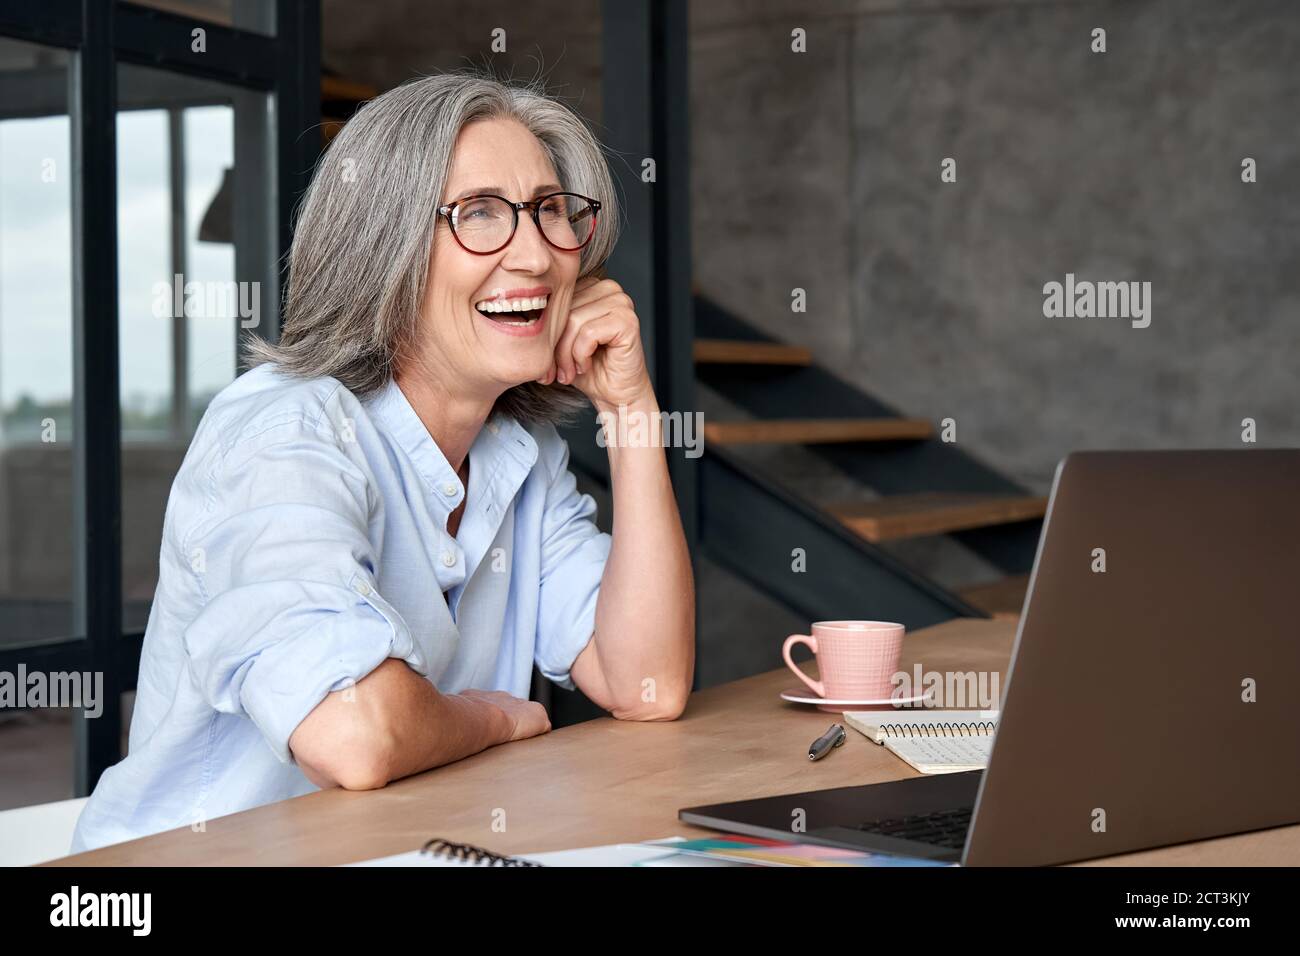 Happy mature middle aged woman laughing sitting at workplace with laptop. Stock Photo